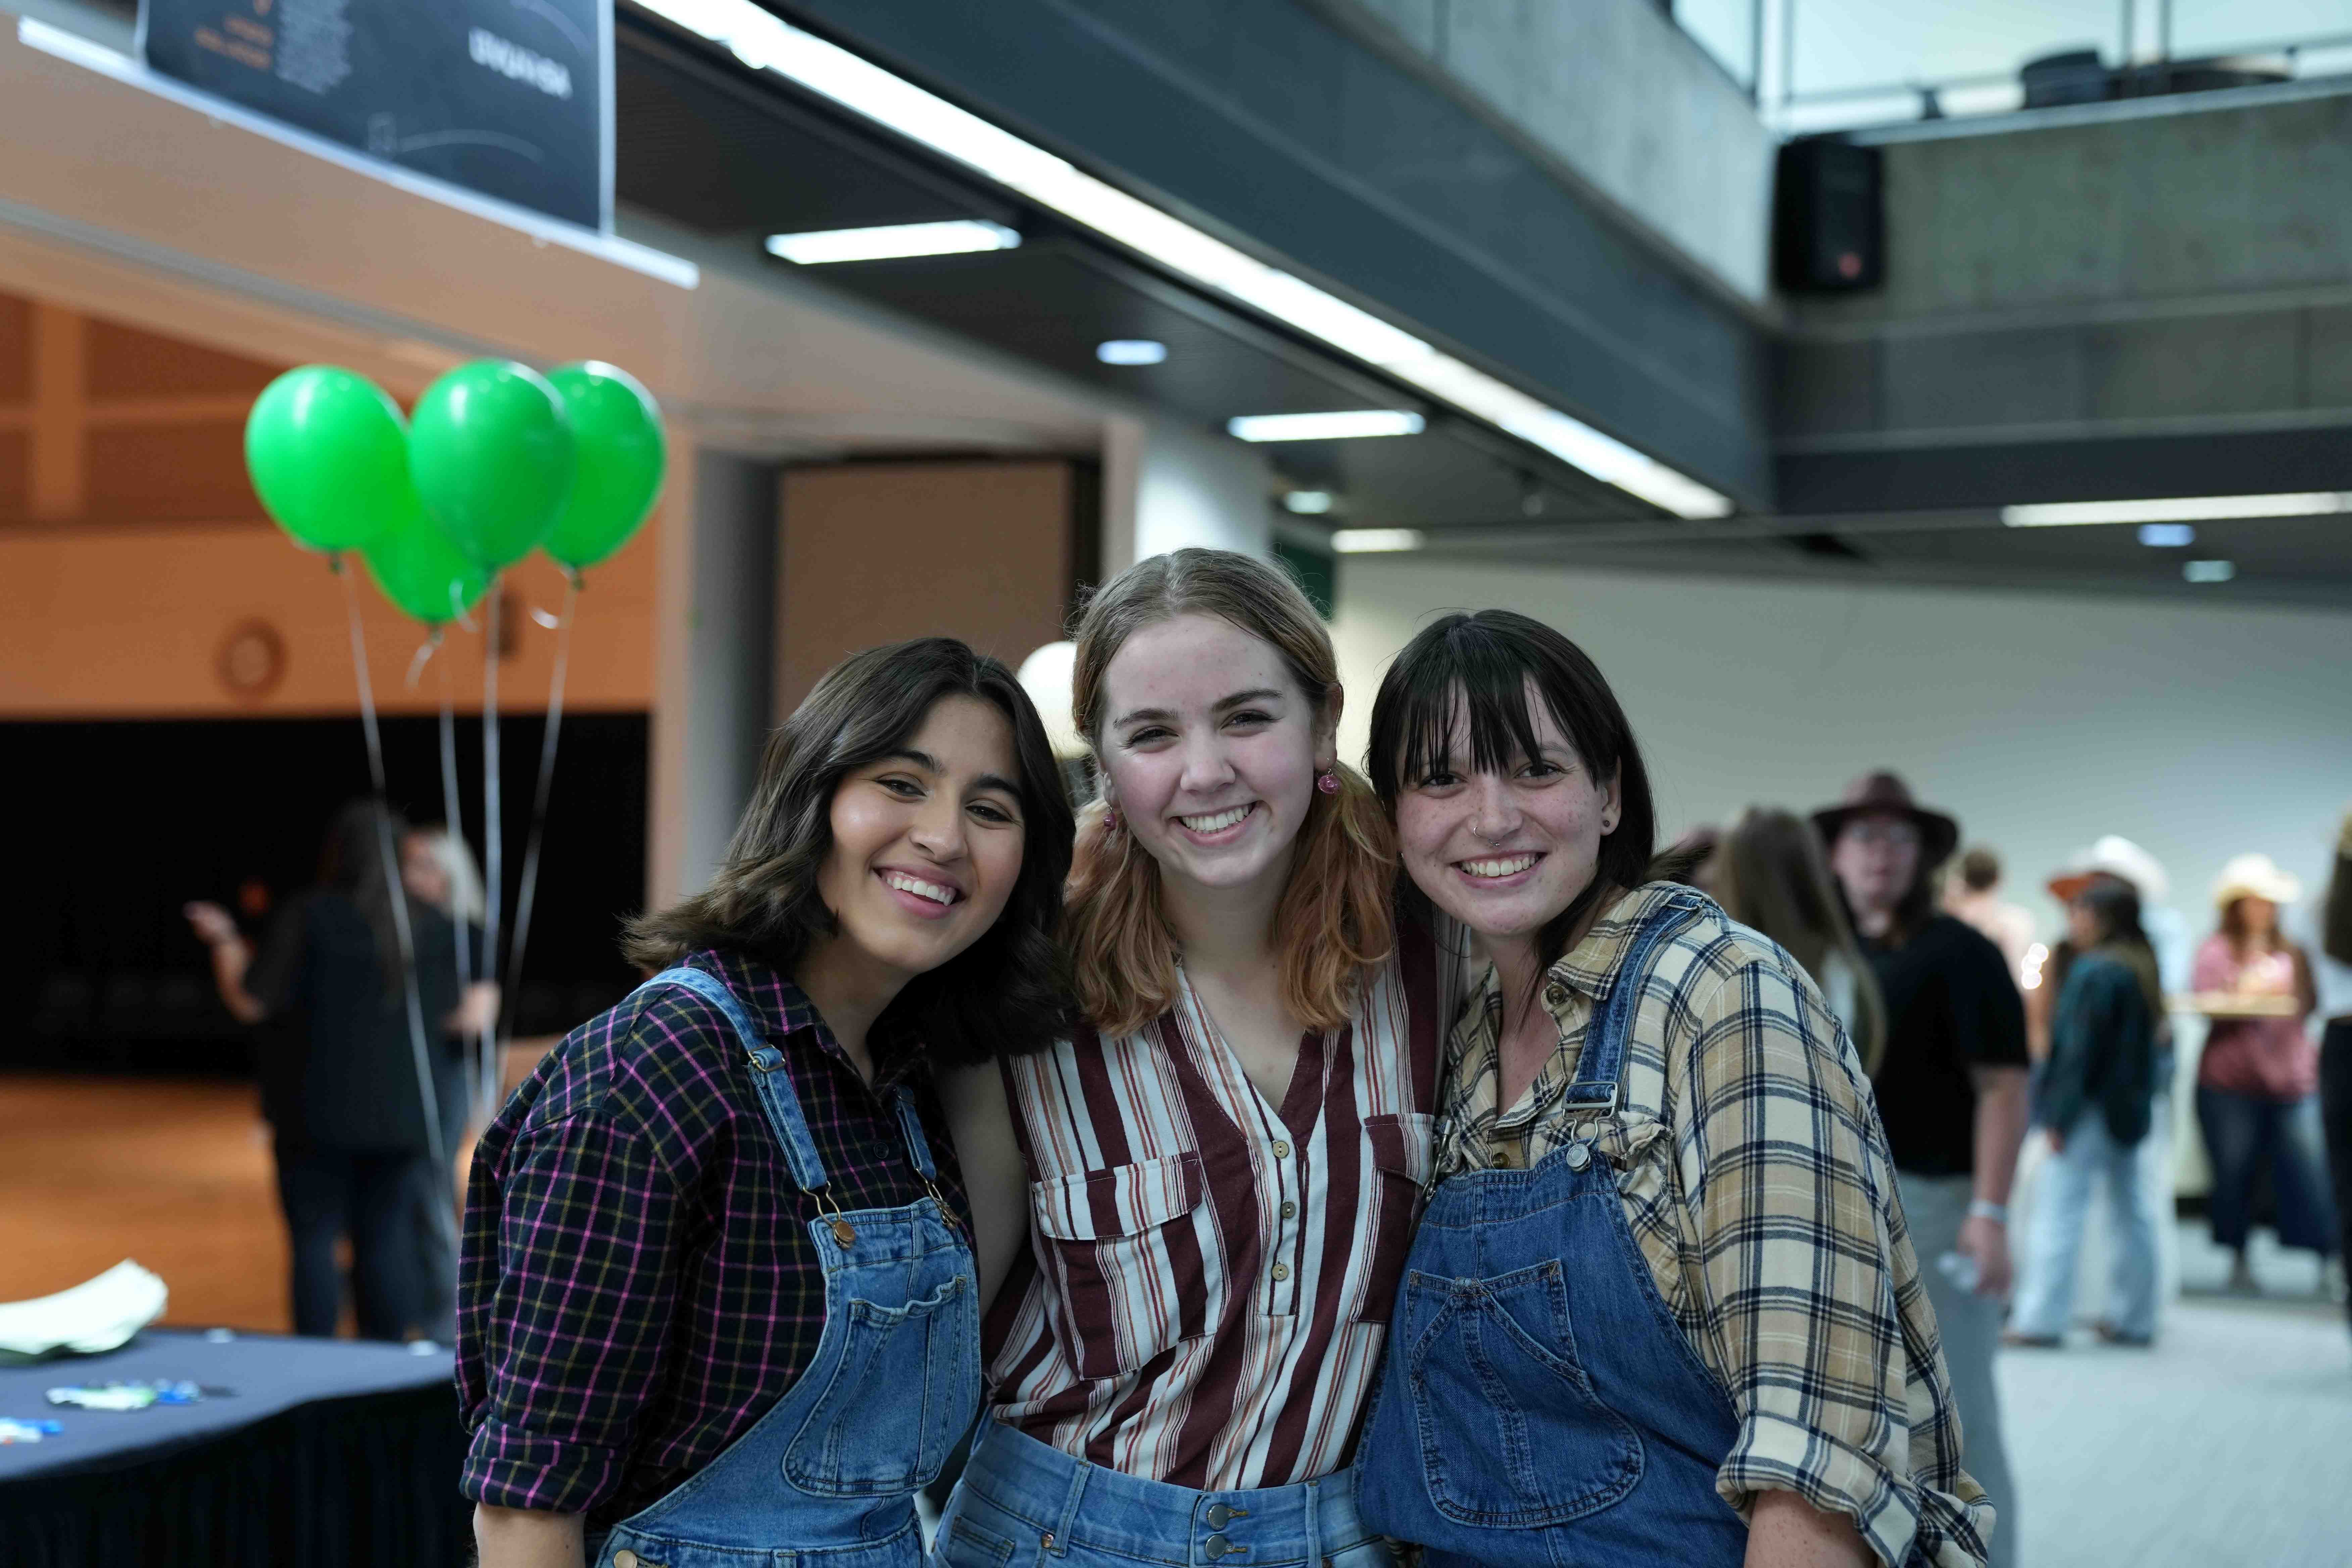 students at an event